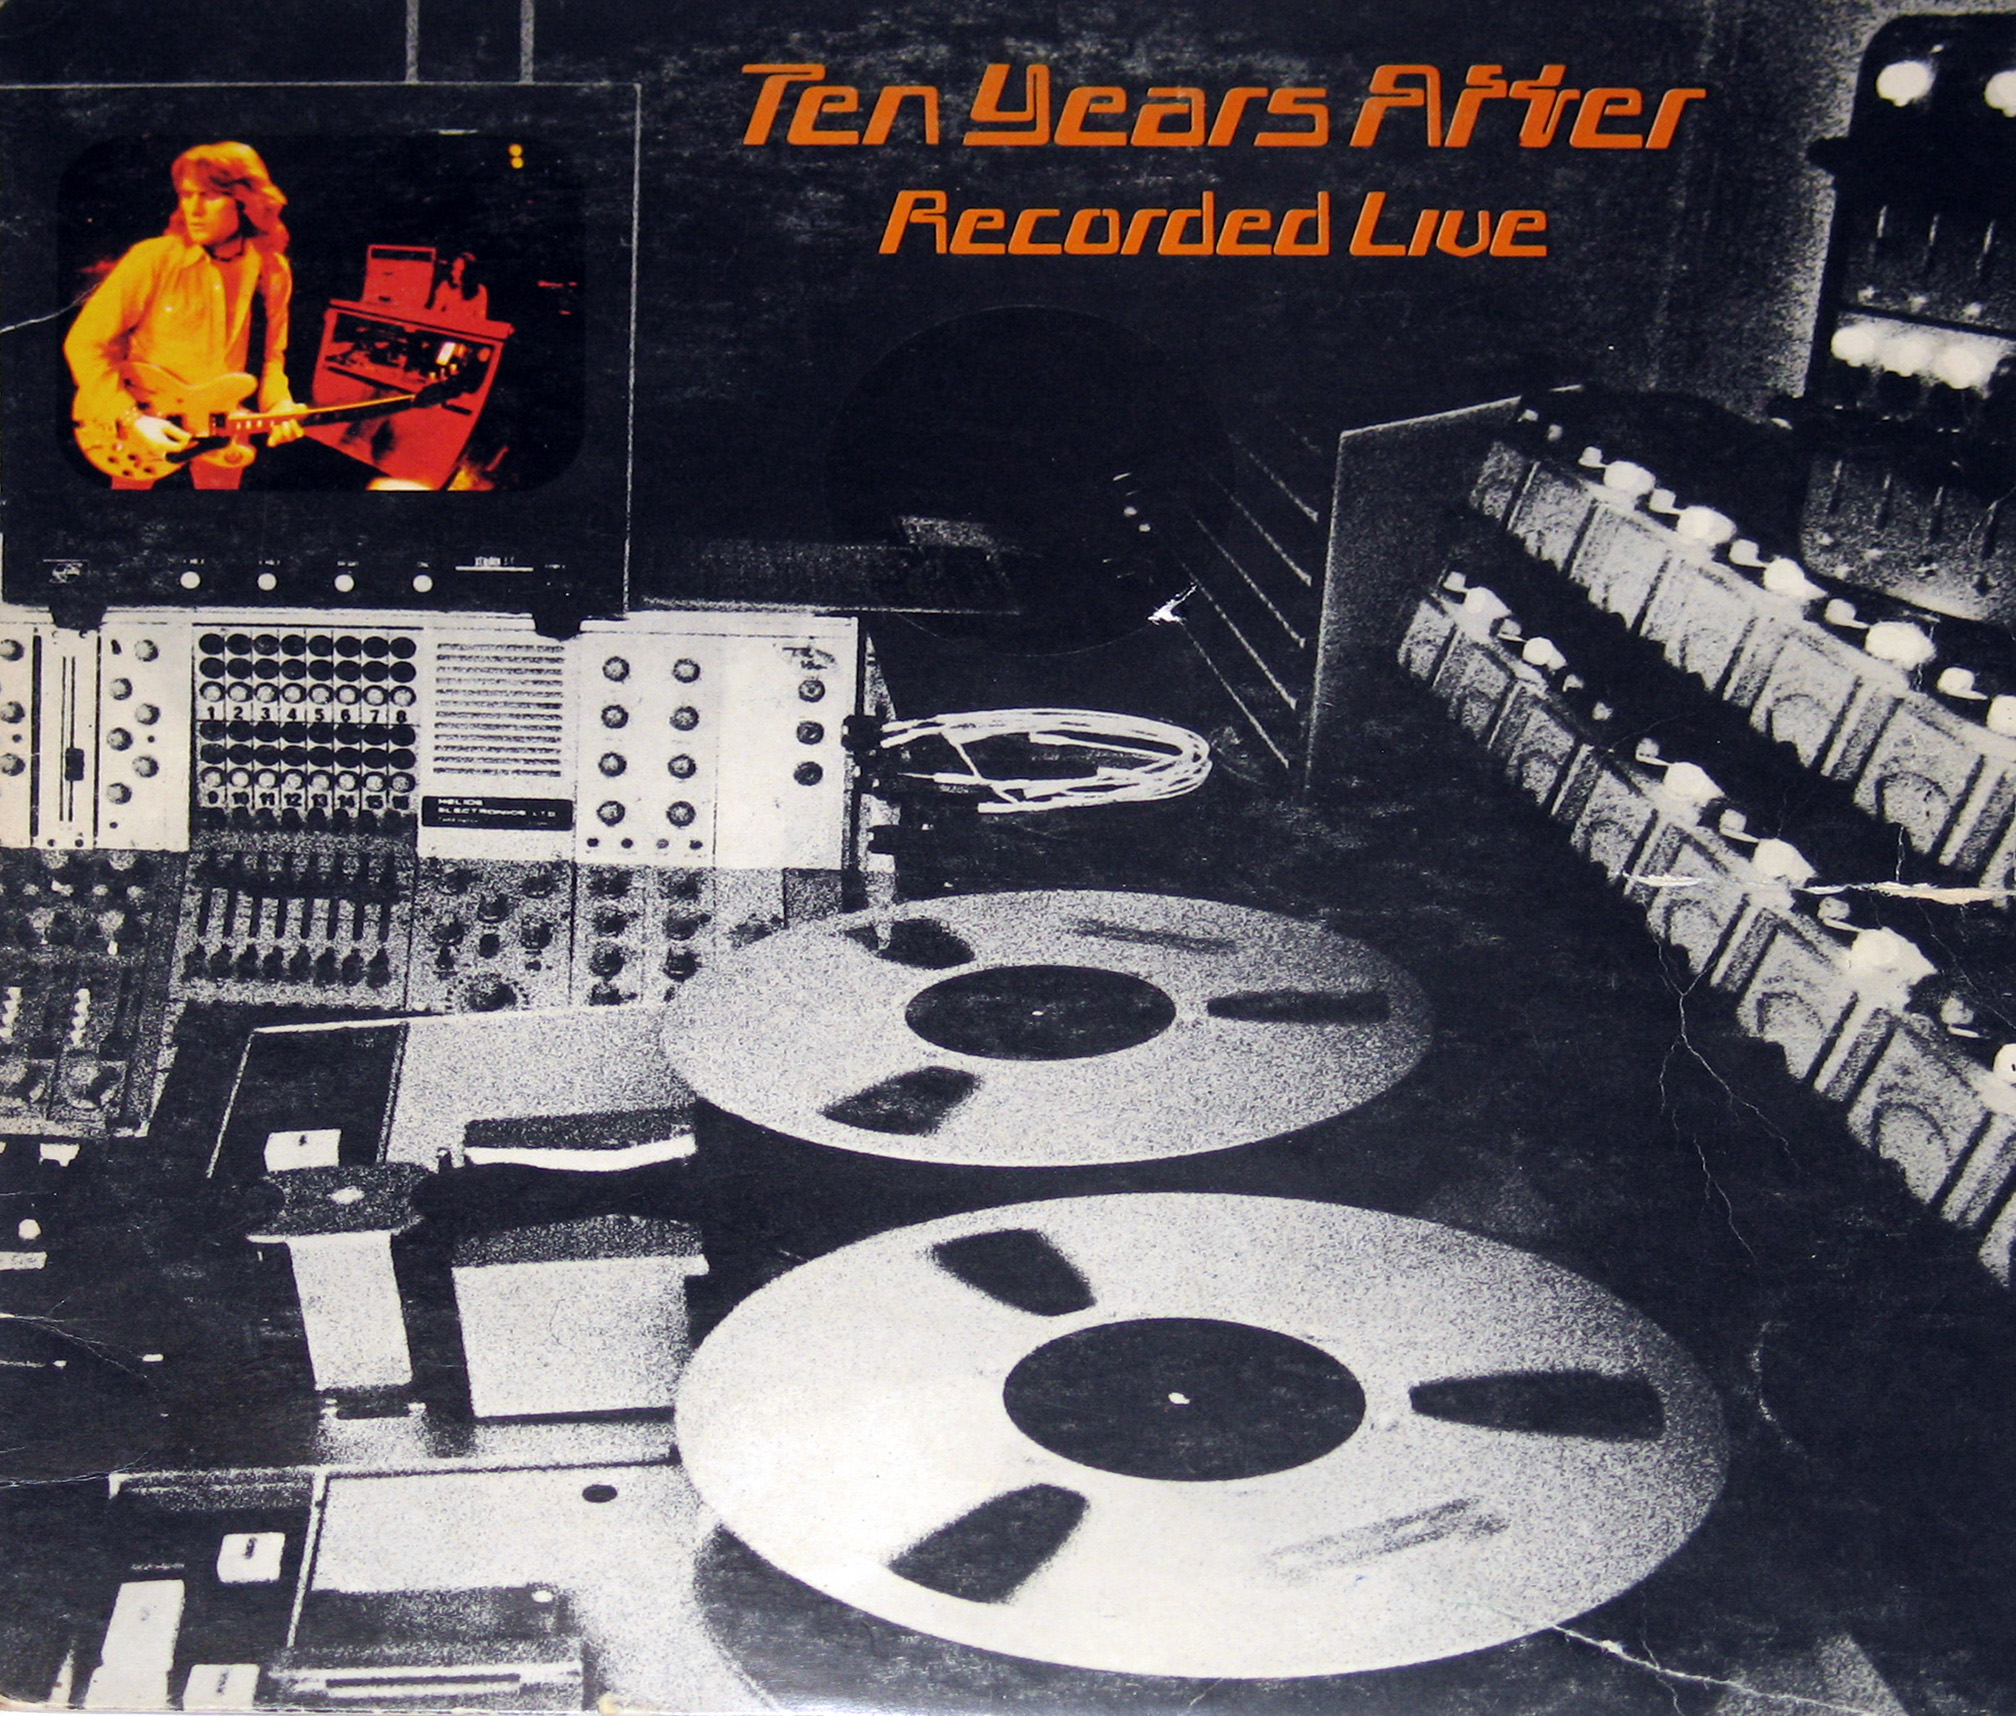 TEN YEARS AFTER - Recorded Live (German Release) album front cover vinyl record